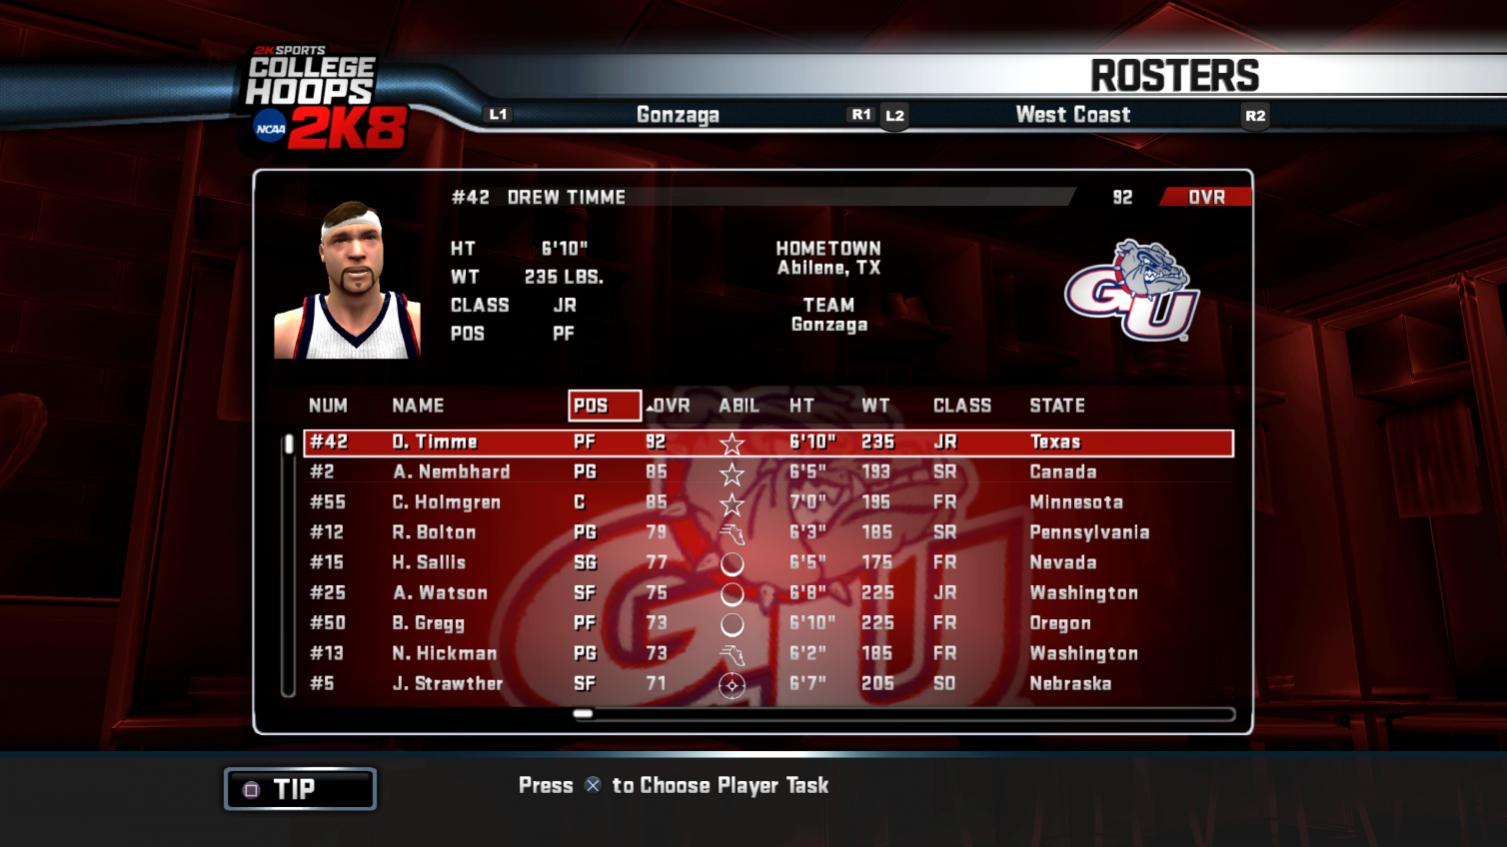 college hoops 2k8 game experience